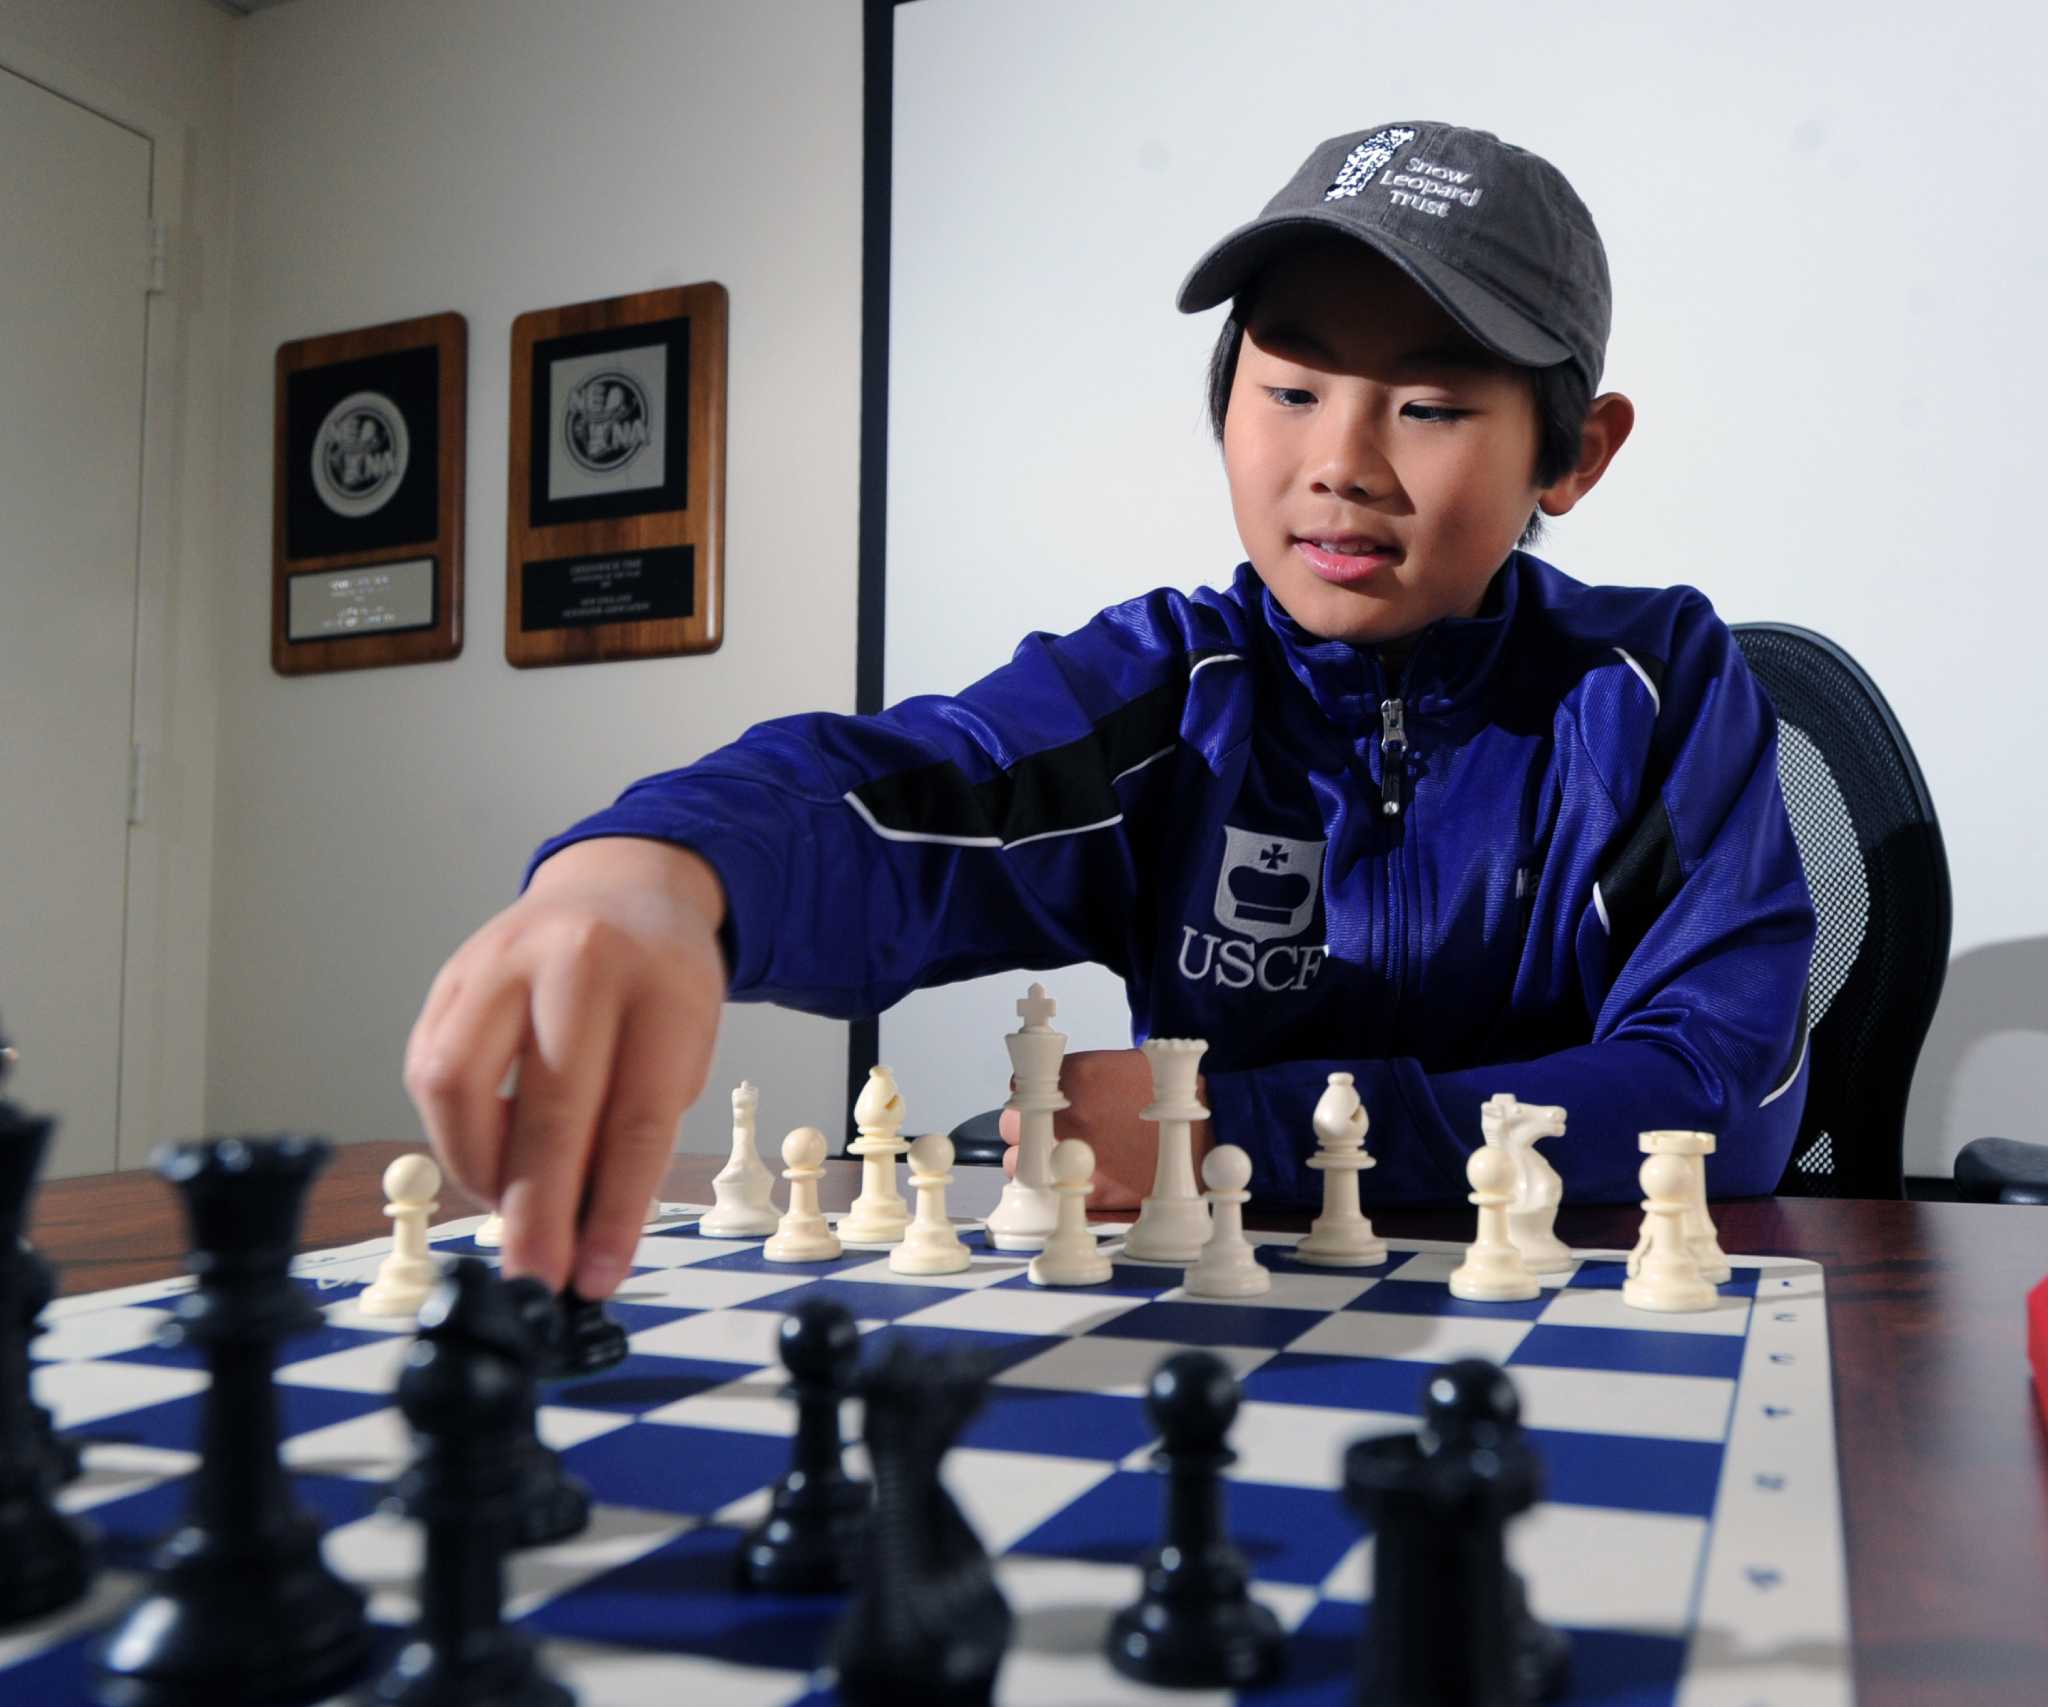 Greenwich's middle school chess master wins 5th place in world cadet play